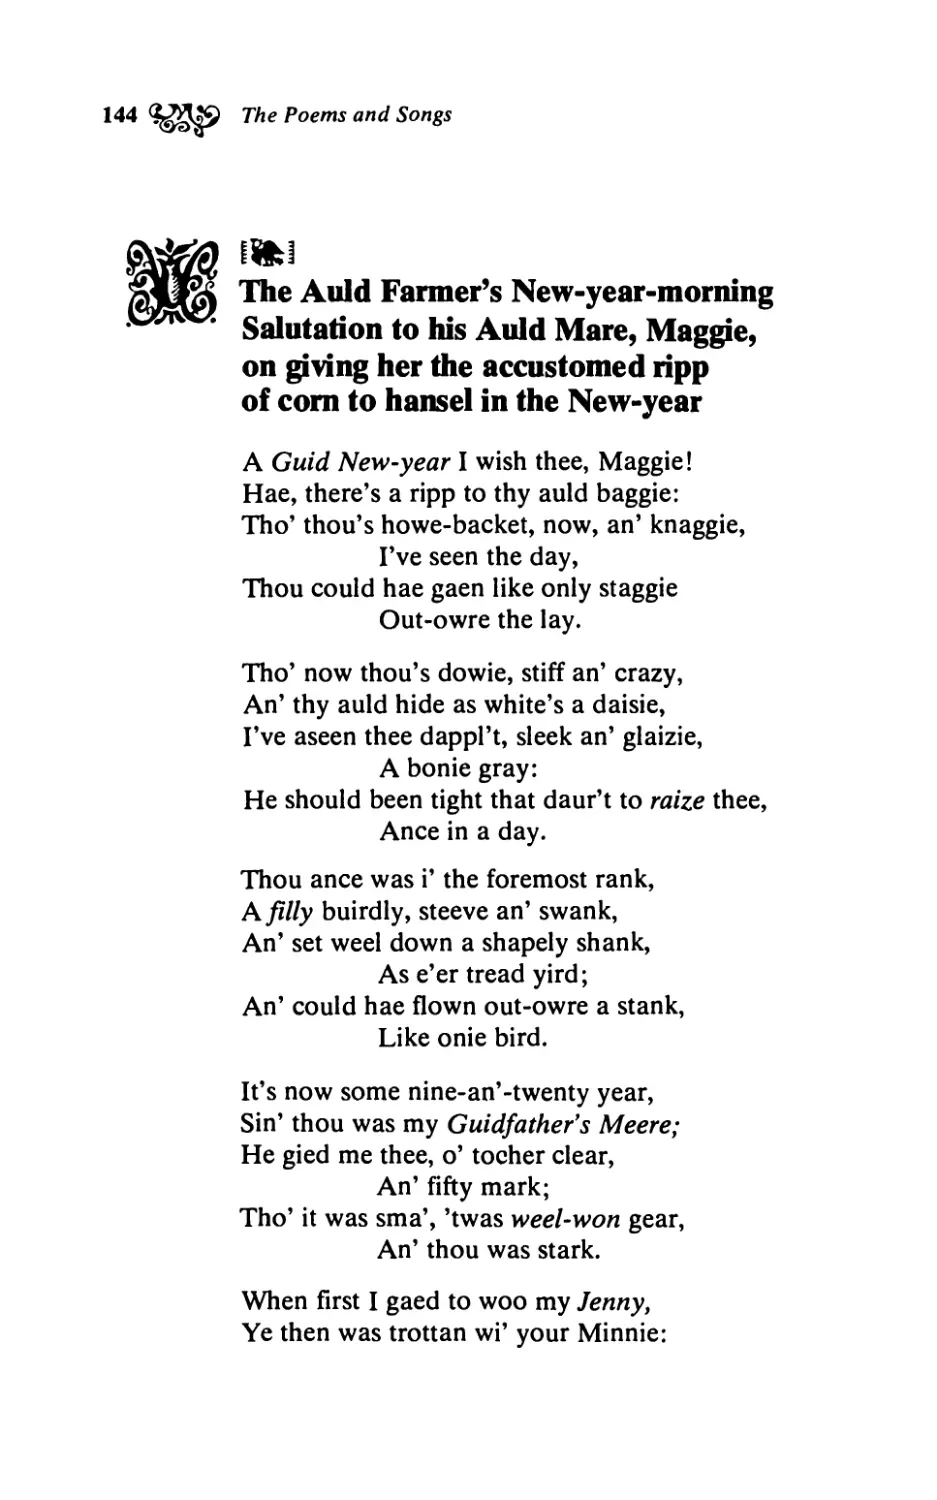 The Auld Farmer’s New-year-morning Salutation to his Auld Mare, Maggie